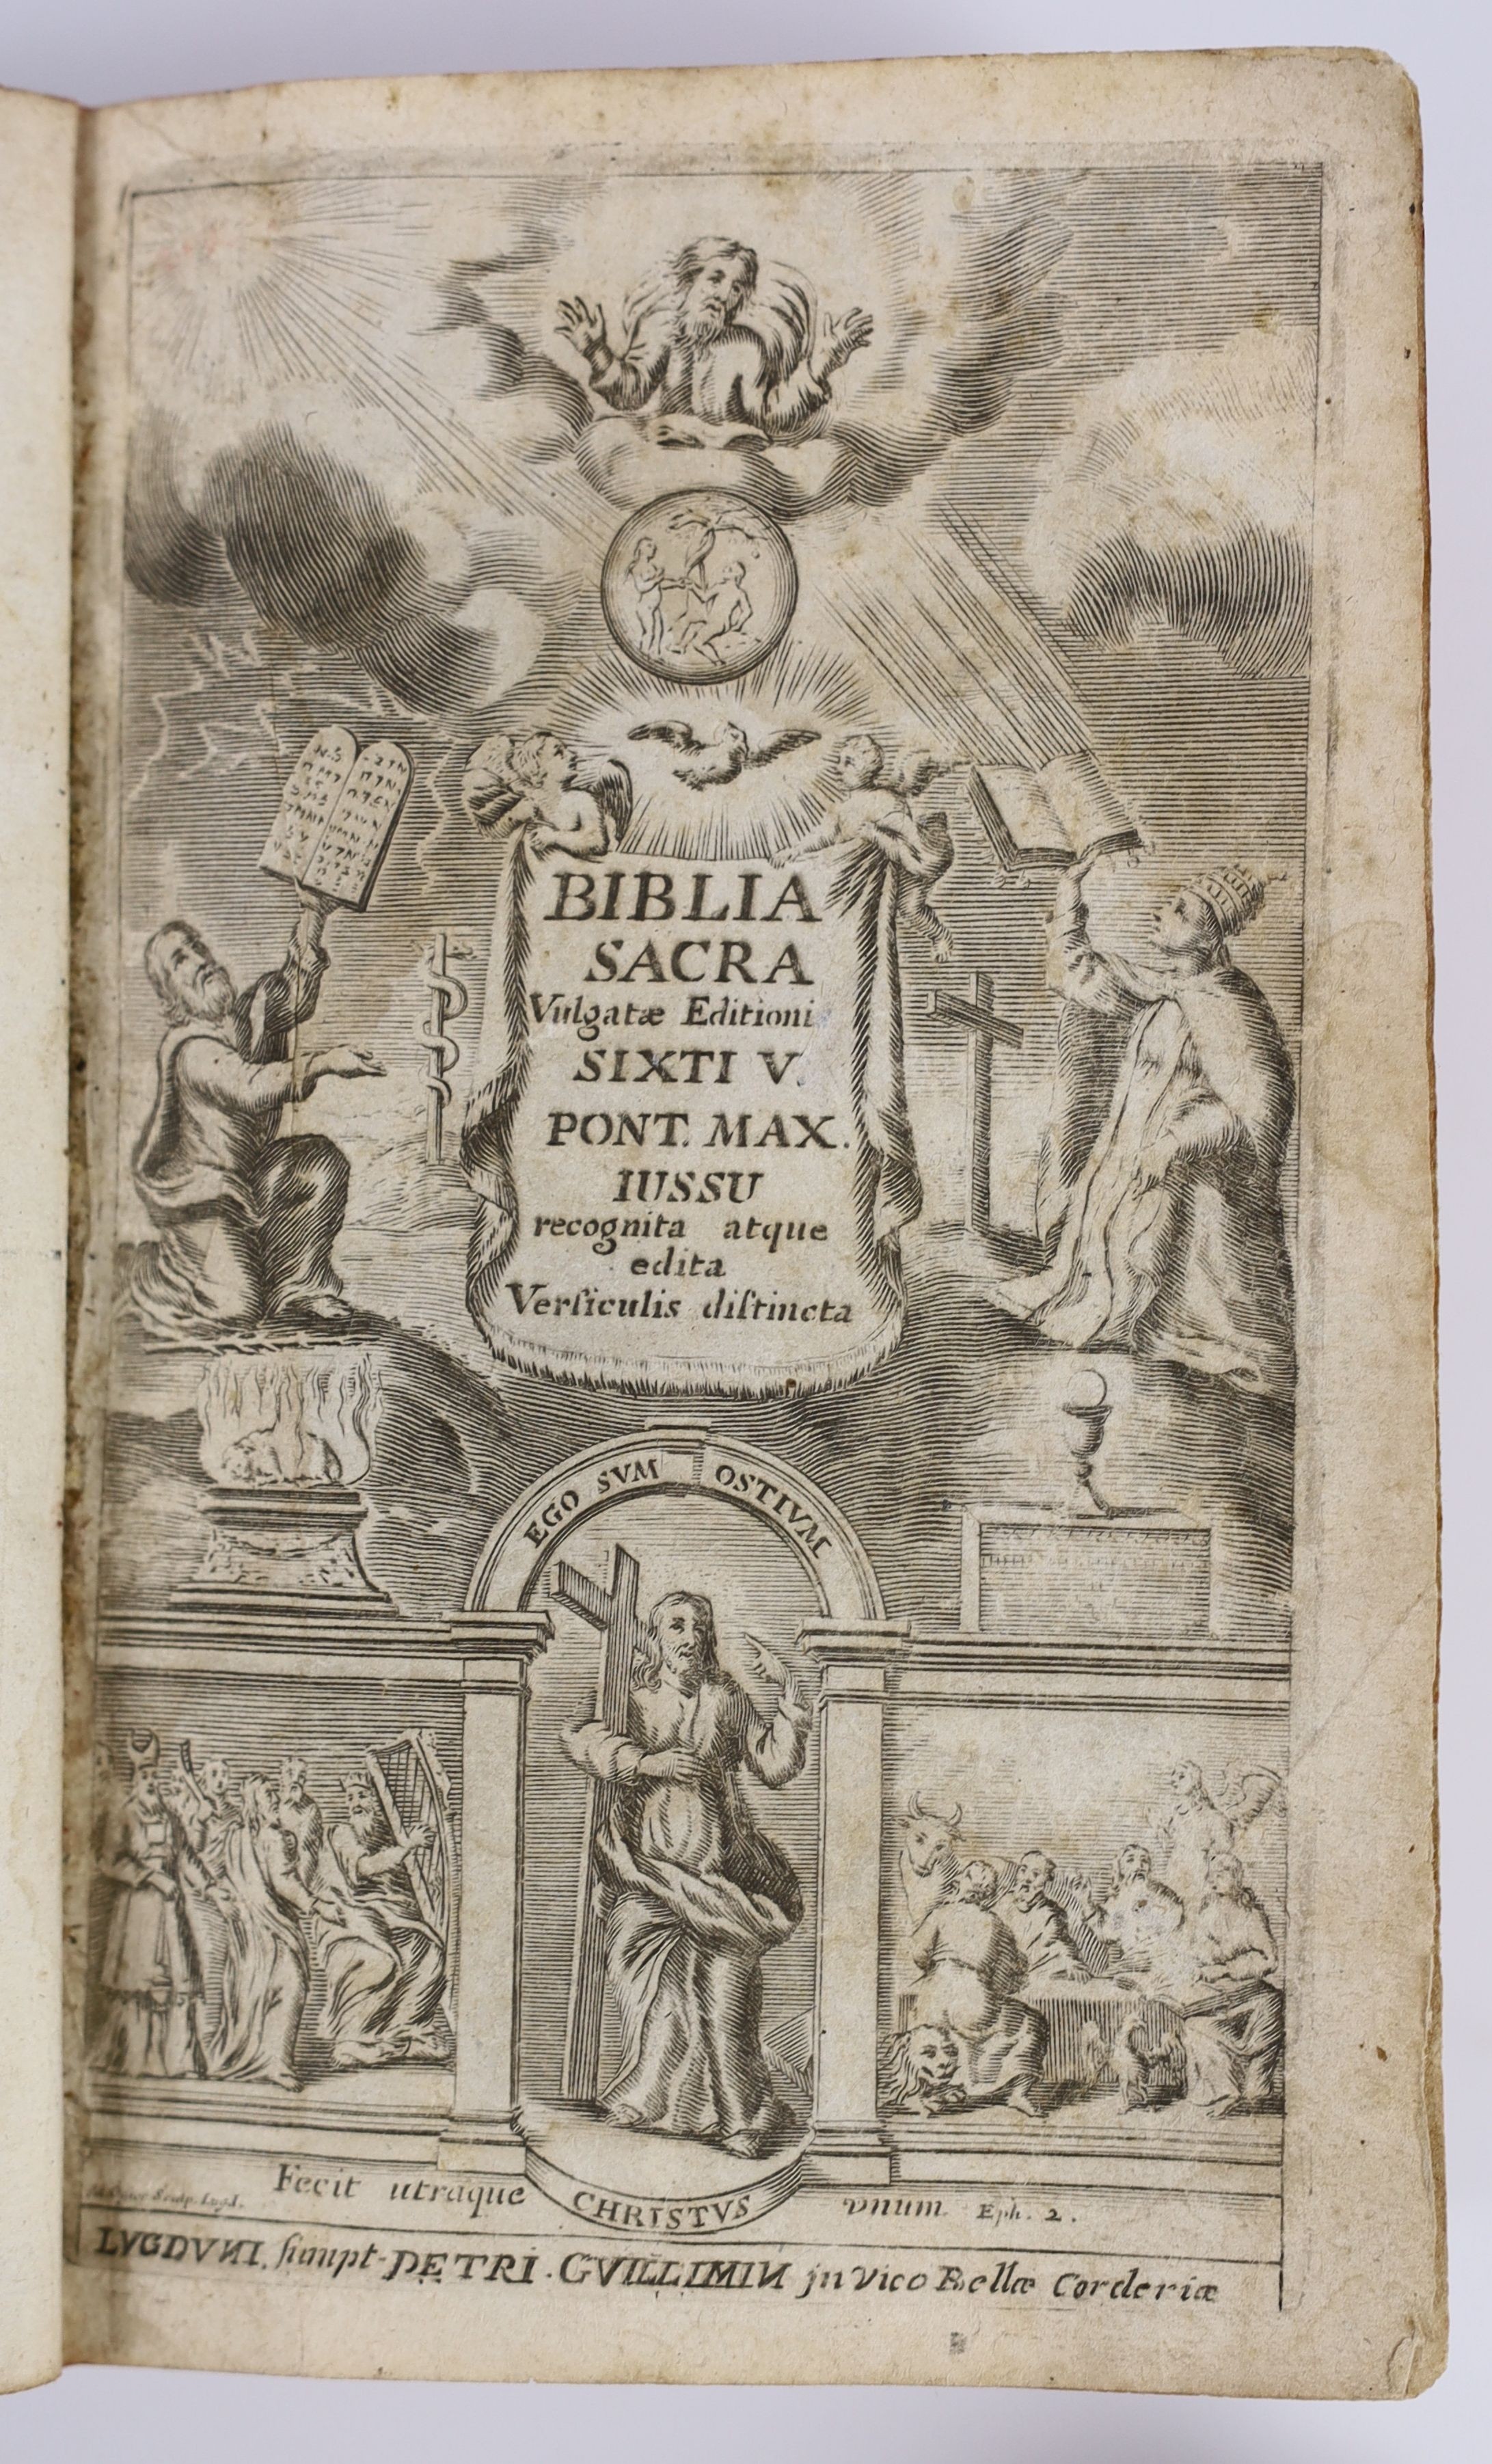 Bible in Latin - Biblia Sacra Vulgate Editioni, Sixti V.Pont. Max. Jussu…… 8vo, calf, weak joints, spine scuffed and relabelled, lacking pages 783-798, Petri Guillimin, Lyon, [c. 1693], with - Bible in English - The Holy